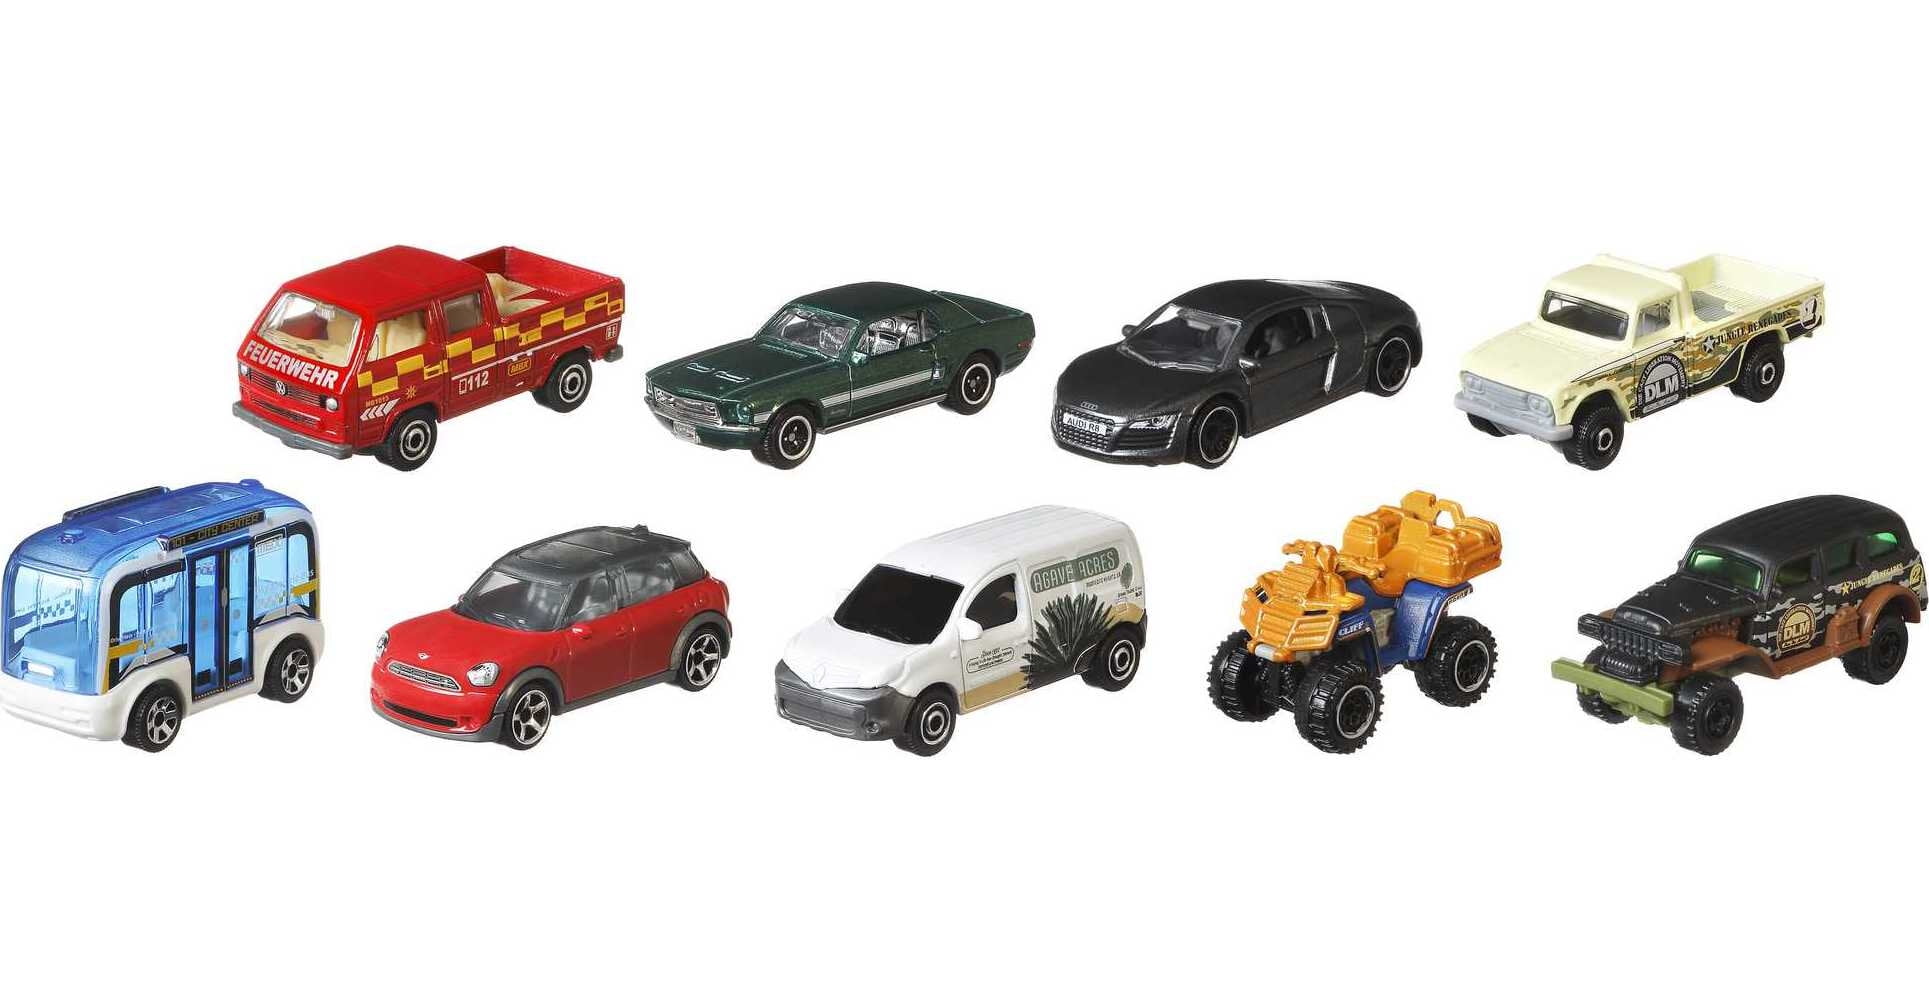 Matchbox Gift Set of 9 Themed Cars or Trucks in 1:64 Scale (Styles May ...